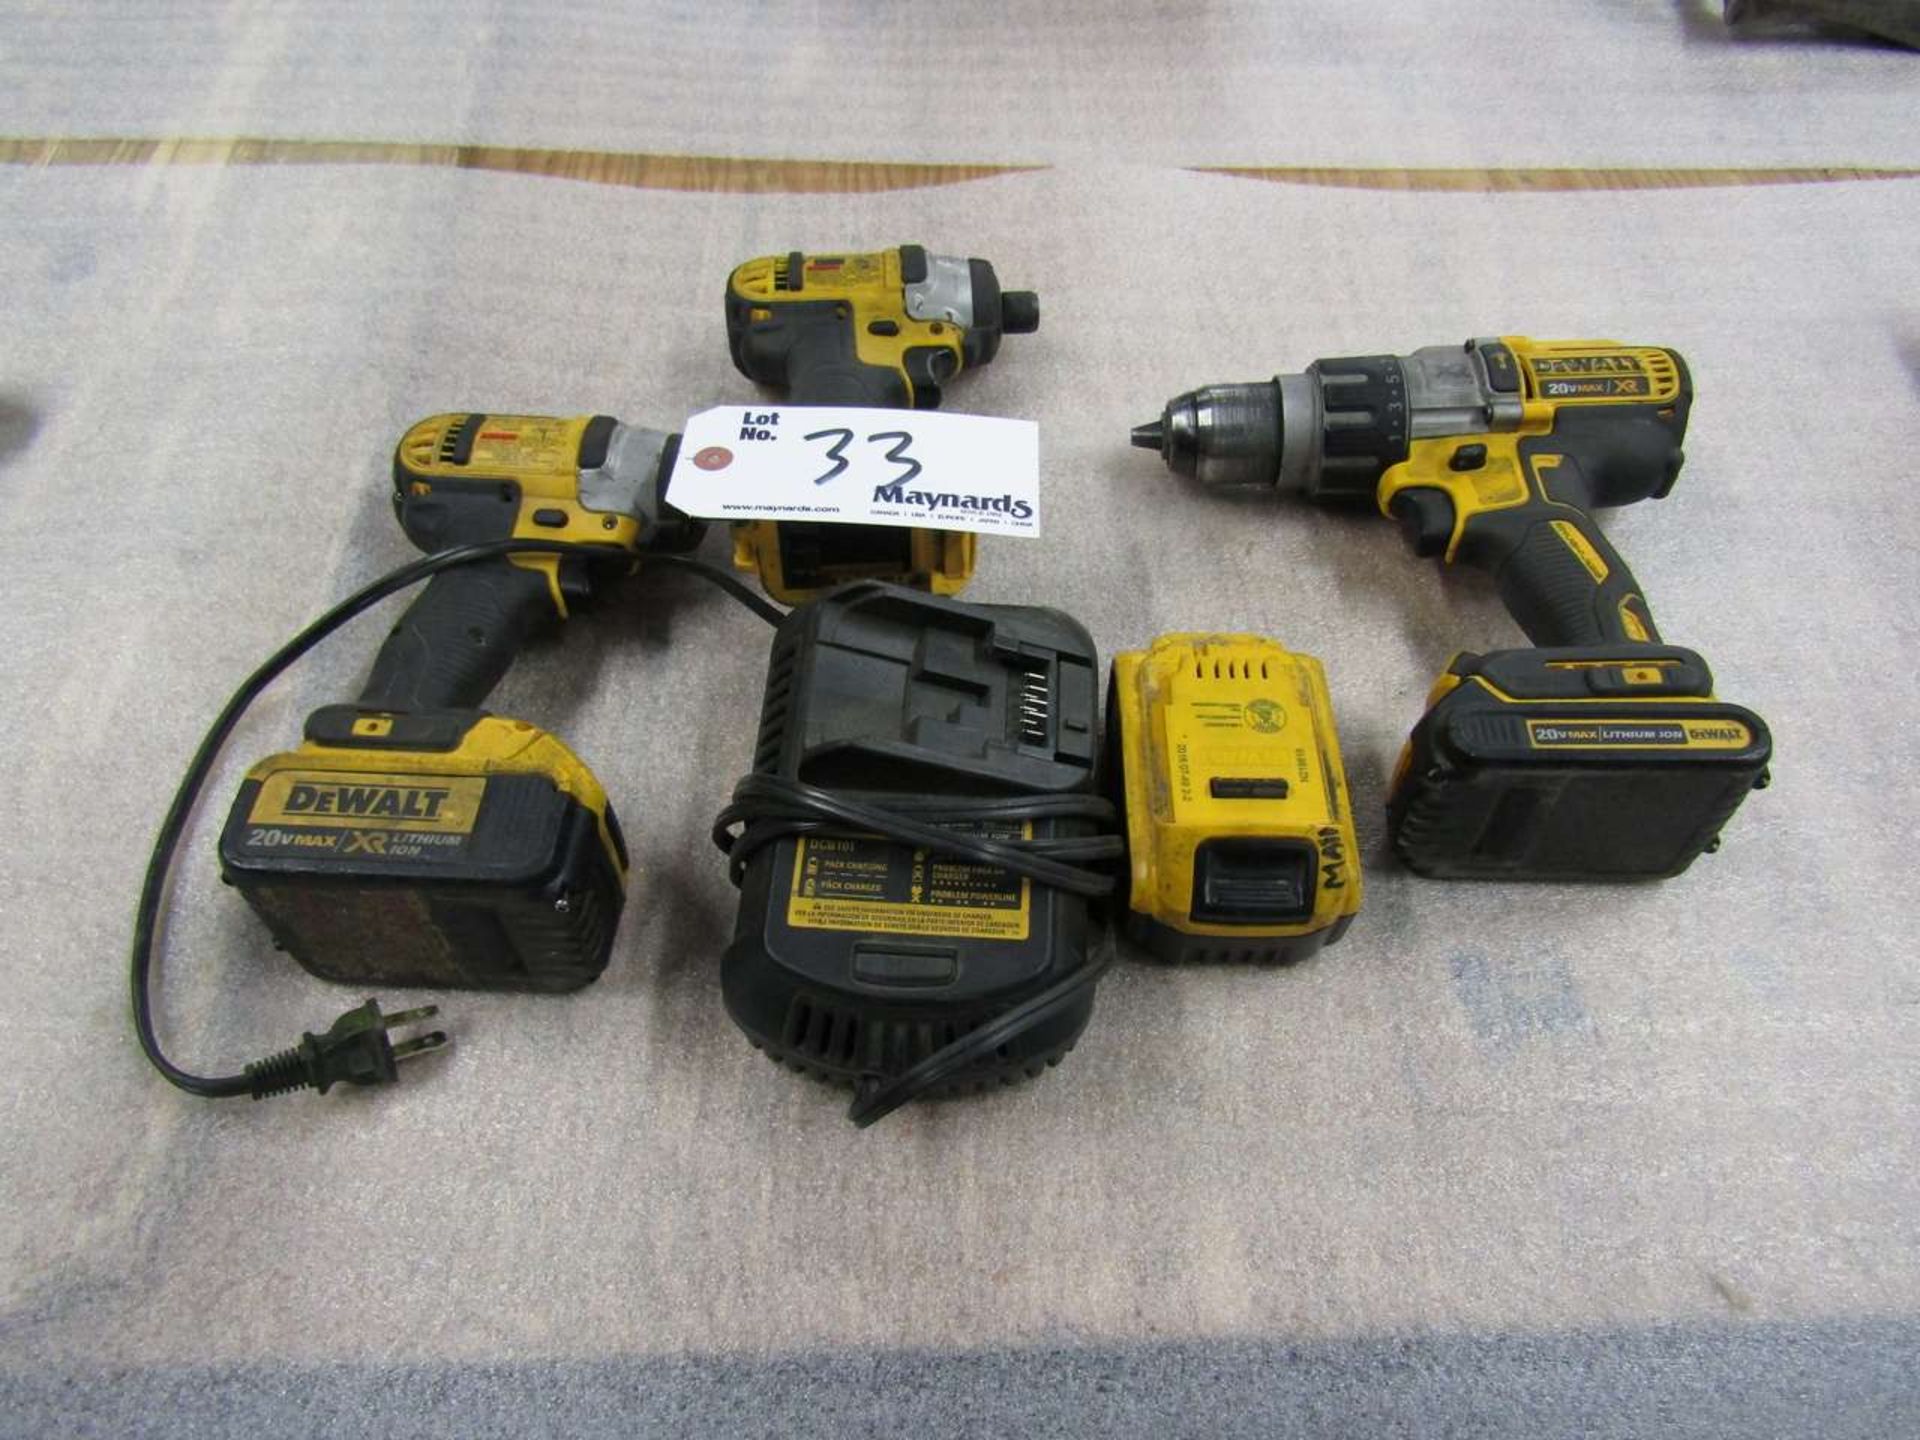 Dewalt 3 Cordless Drills with Batteries and 1 Charger